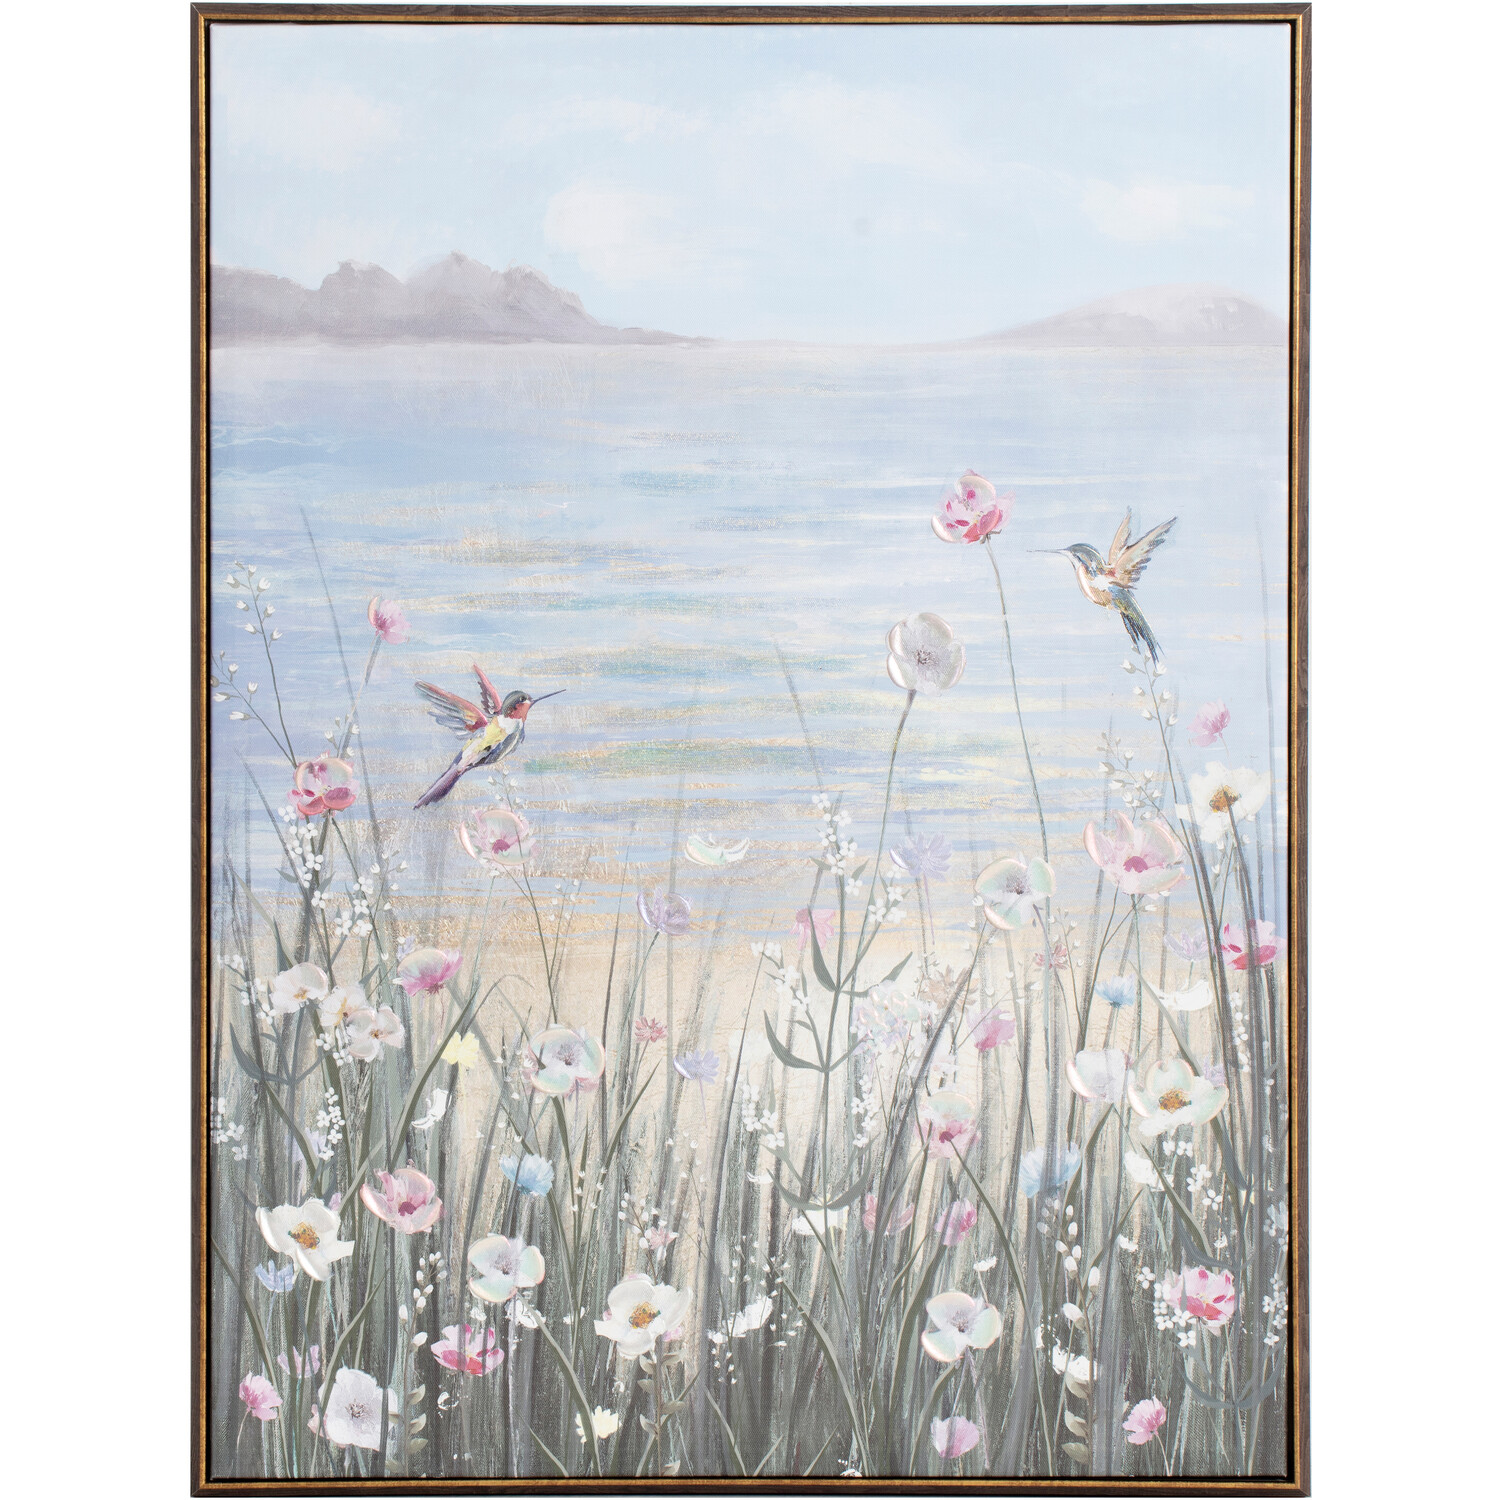 Blue Humming Birds By The Sea Framed Canvas Wall Art 60 x 80cm Image